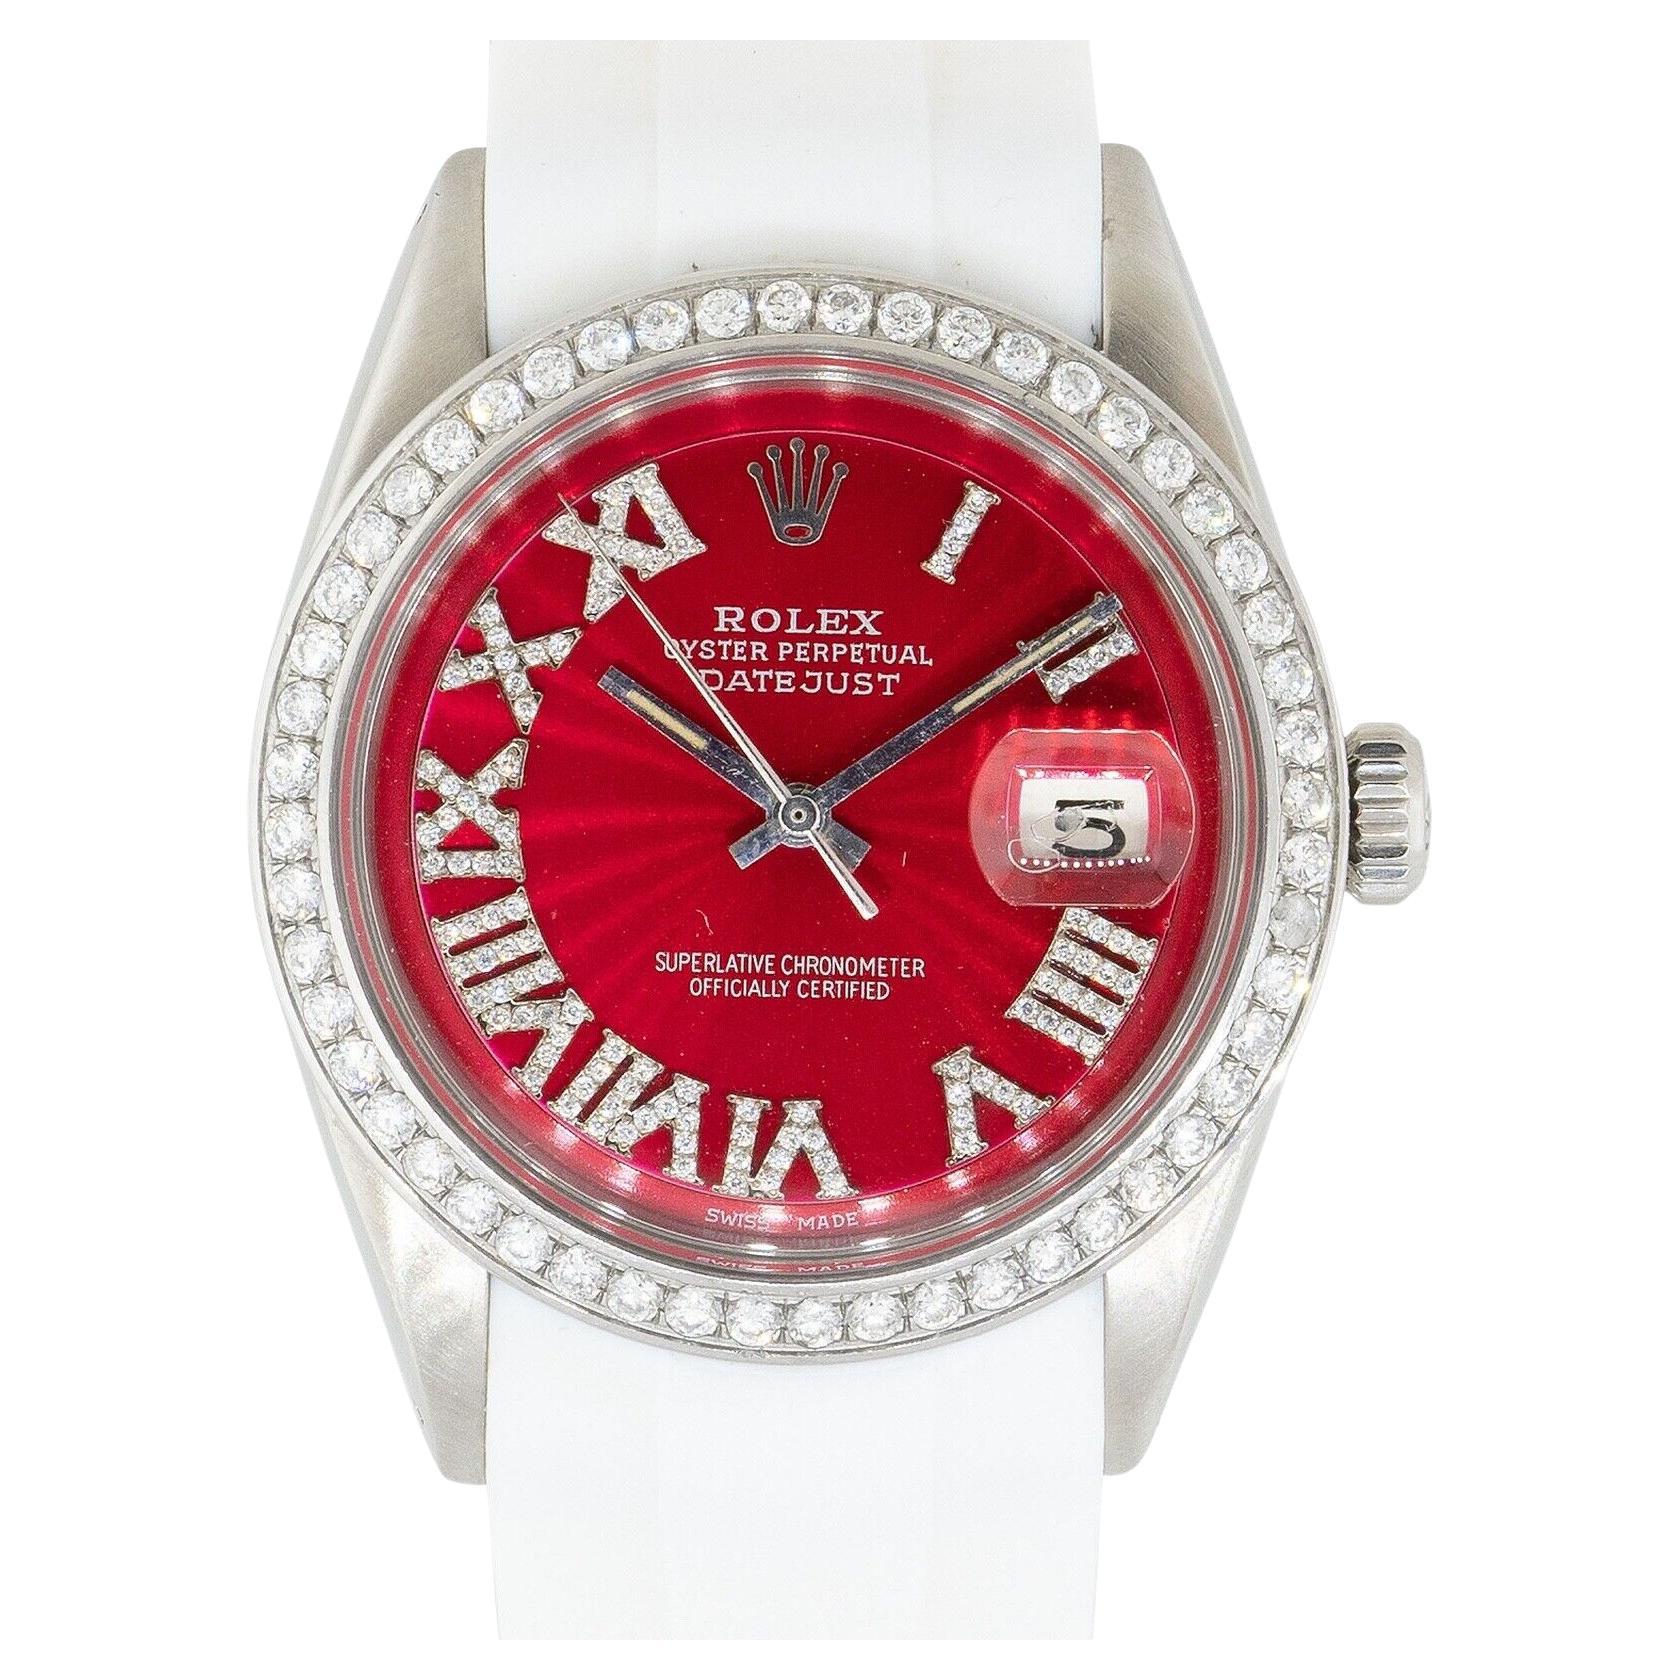 Rolex 1603 Datejust 36mm Stainless Steel Red Diamond Dial Watch